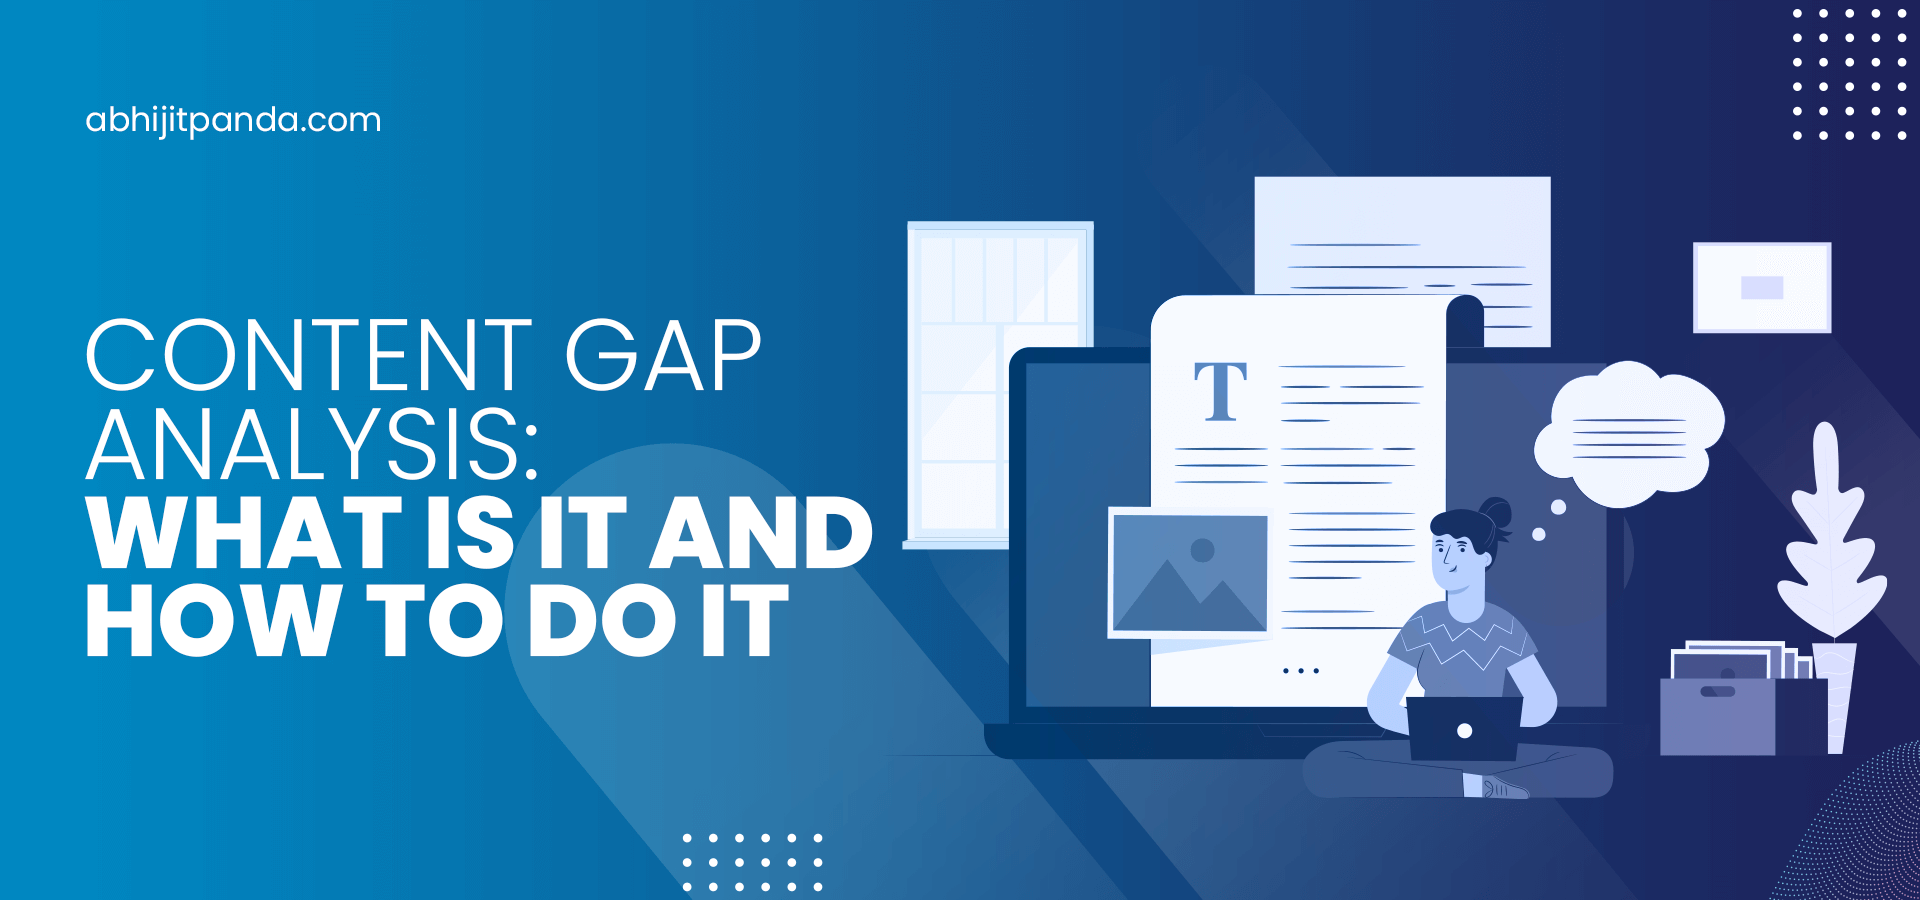 Content Gap Analysis: What is it and How to do it?